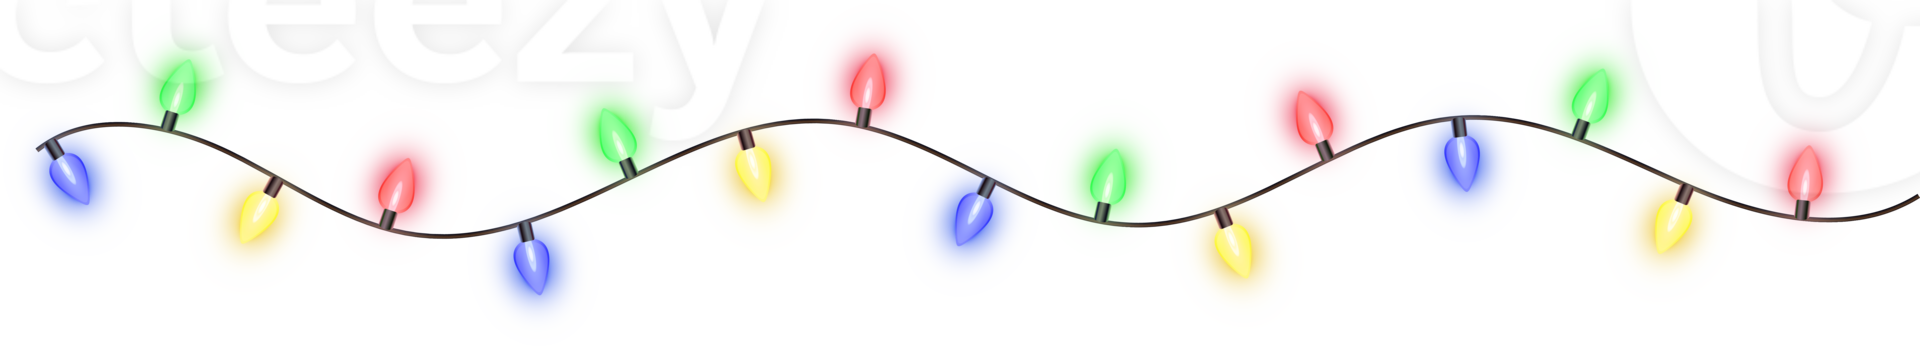 Natale colore luci png